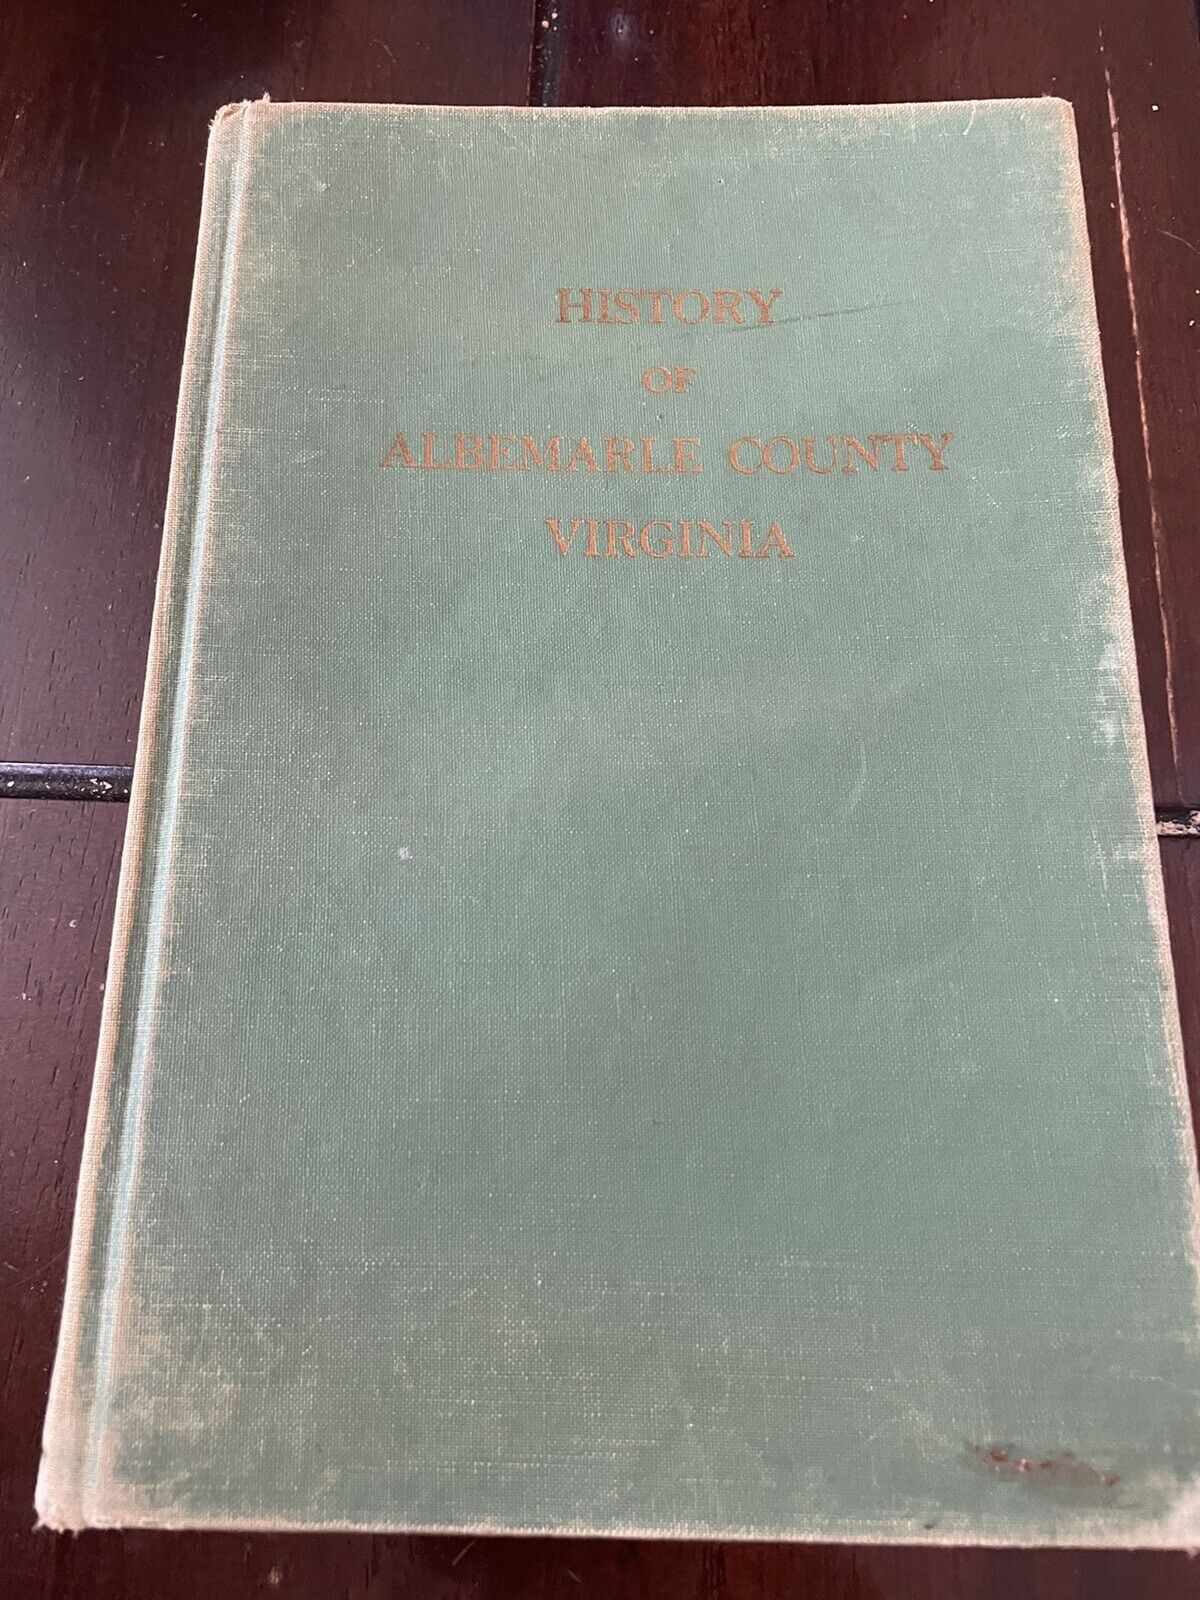 History Of Albemarle County Virginia Hardcover- Possibly First Ed By Edgar Woods